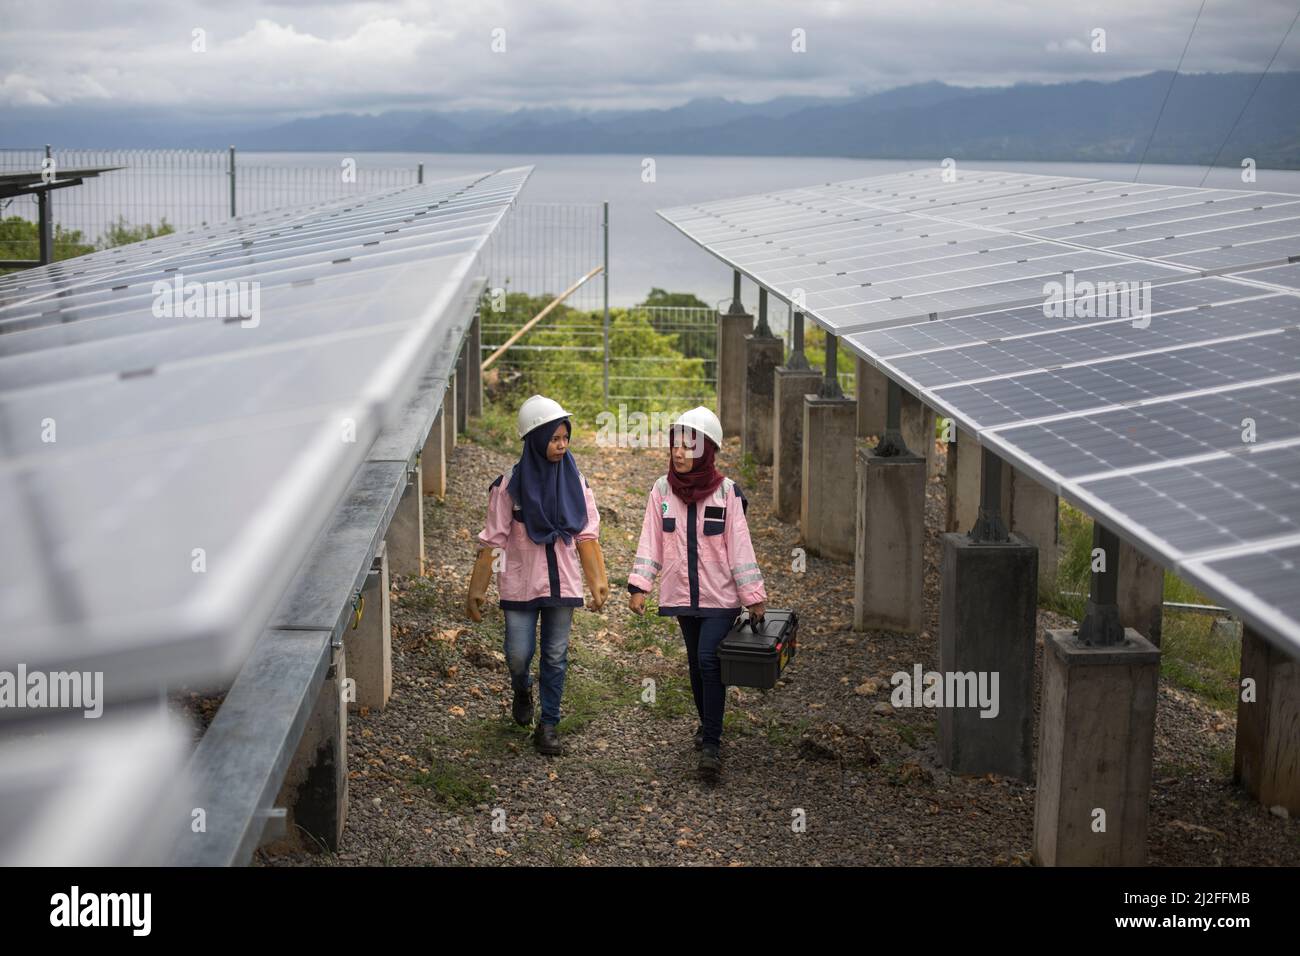 Junior electrical technicians, Karmila (23, l) and Verawati (25, r) inspect and maintain solar panels on Karampuang Island, Indonesia, which were inst Stock Photo